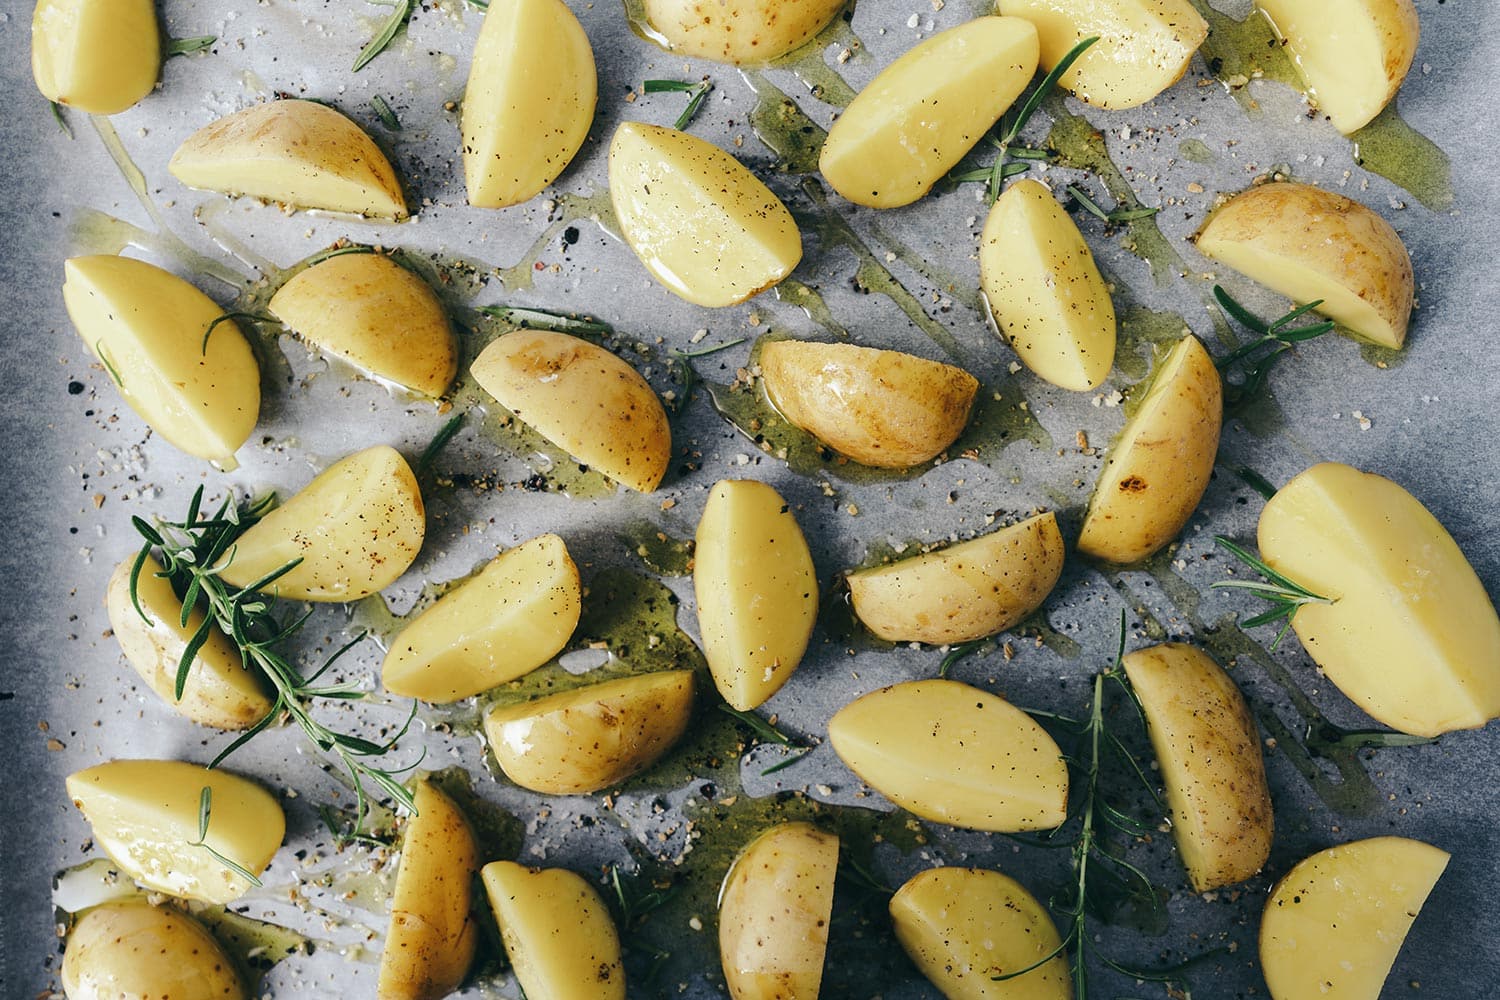 Raw potato wedges with oil and pepper on baking tray